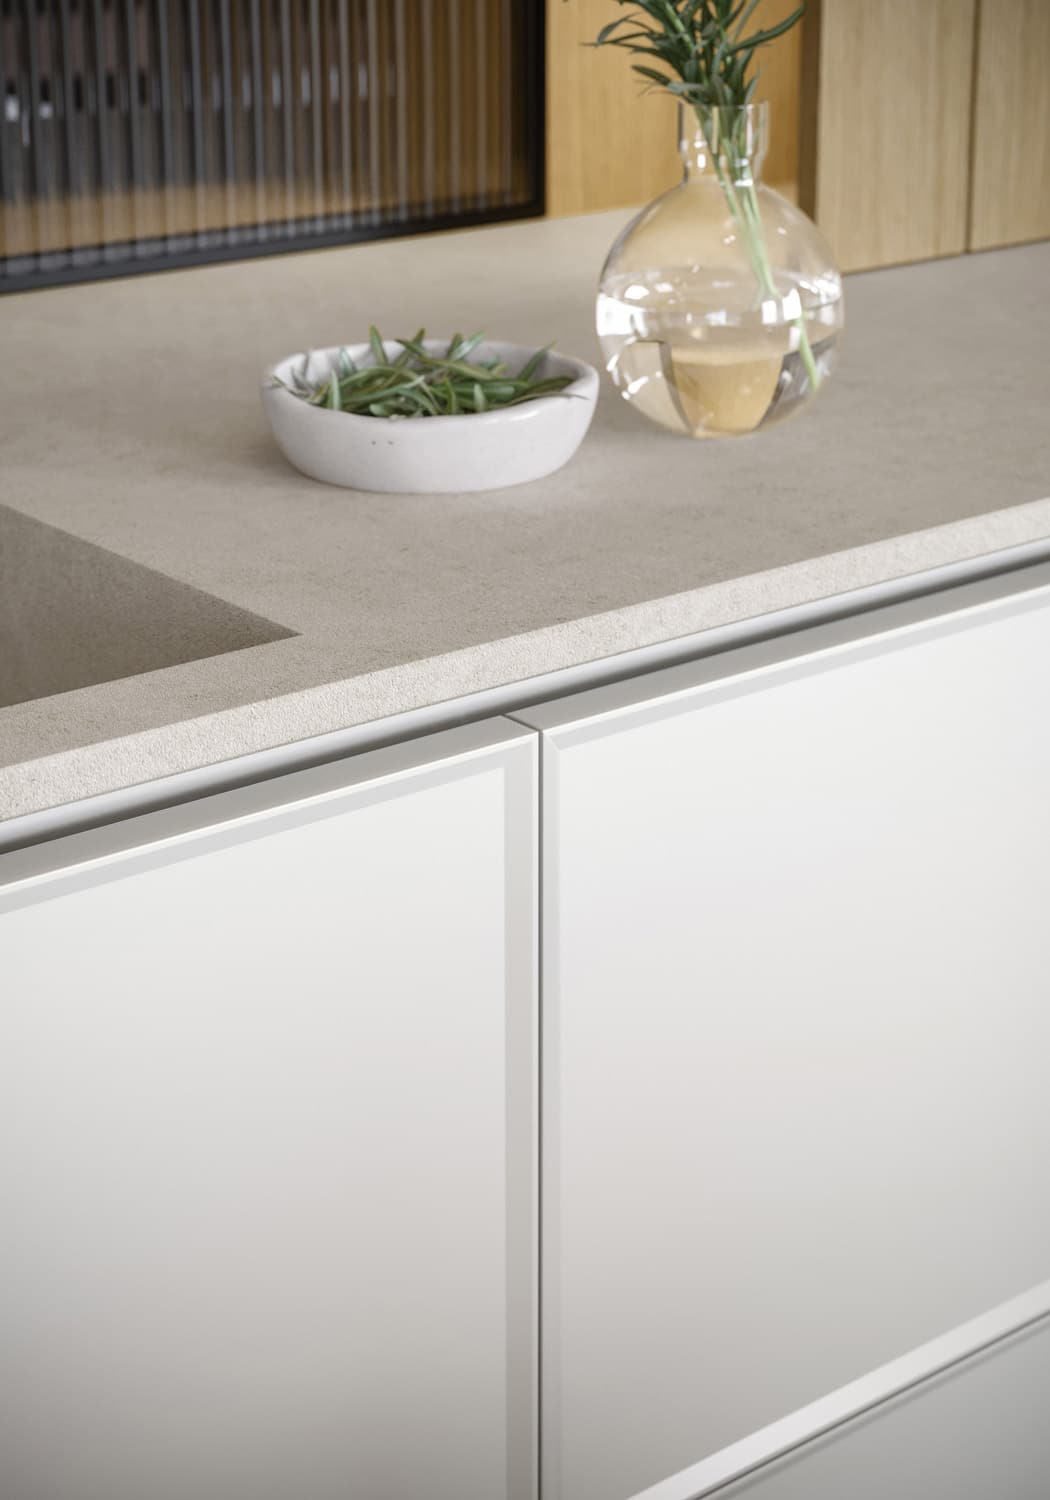 The kitchen’s base cabinets use the “Teatro” contemporary-style shaker door, which features a minimalist frame and a C-shaped integrated channel.  